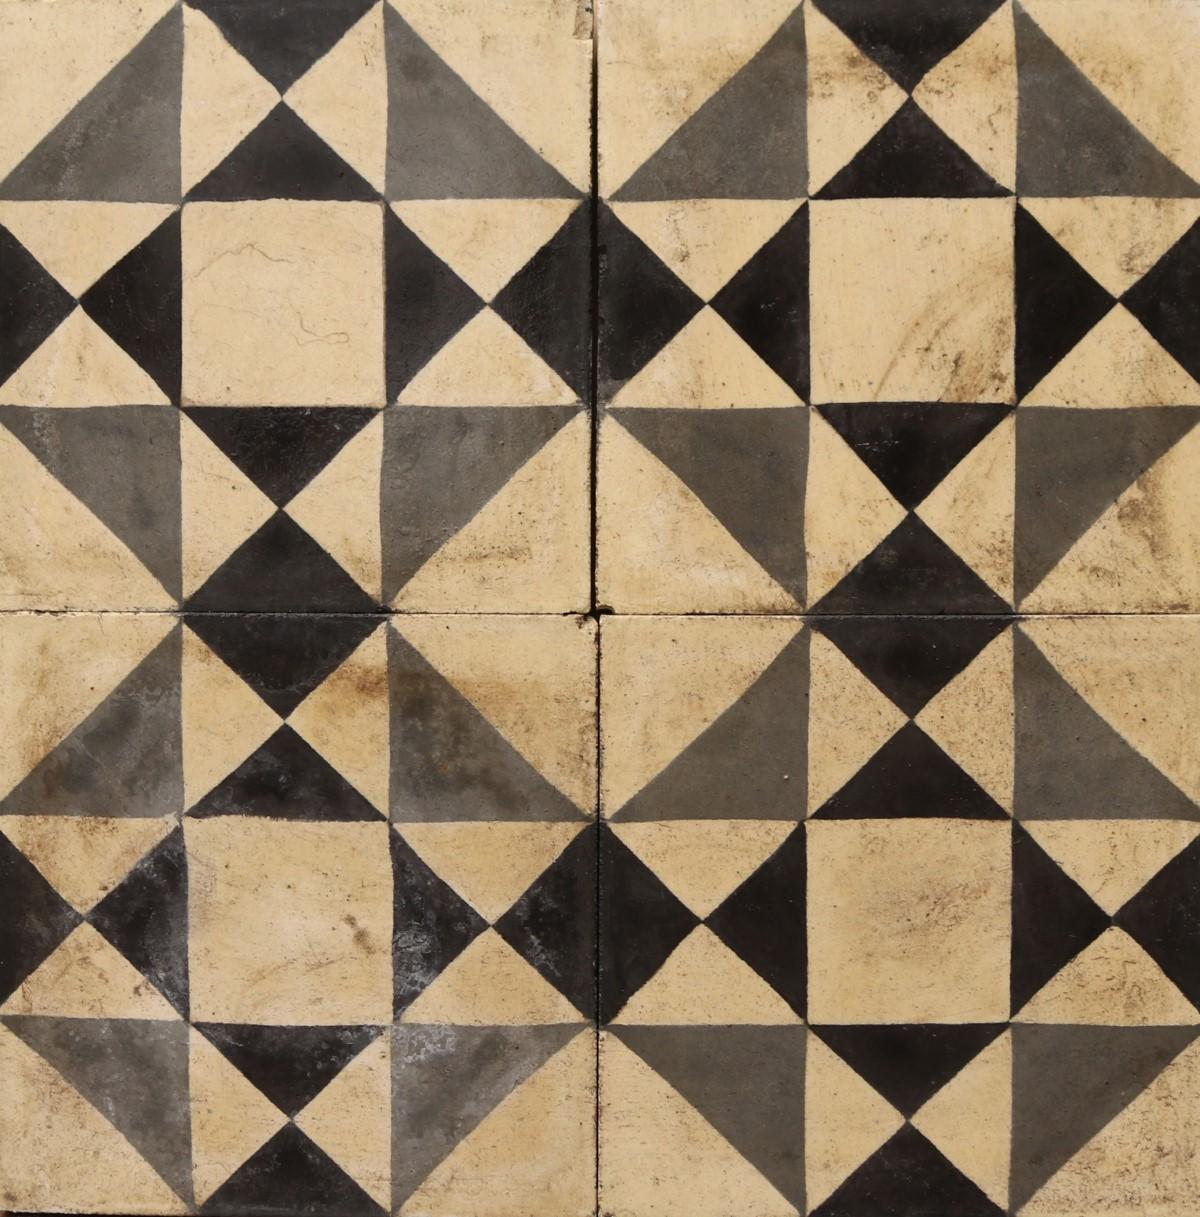 A batch of 42 reclaimed encaustic cement floor or wall tiles with a geometric style pattern. These tiles will cover 1.8 m2 or 19 ft2.

Weathered surfaces and small chips associated with transport and storage. Unused. Good overall condition. Small